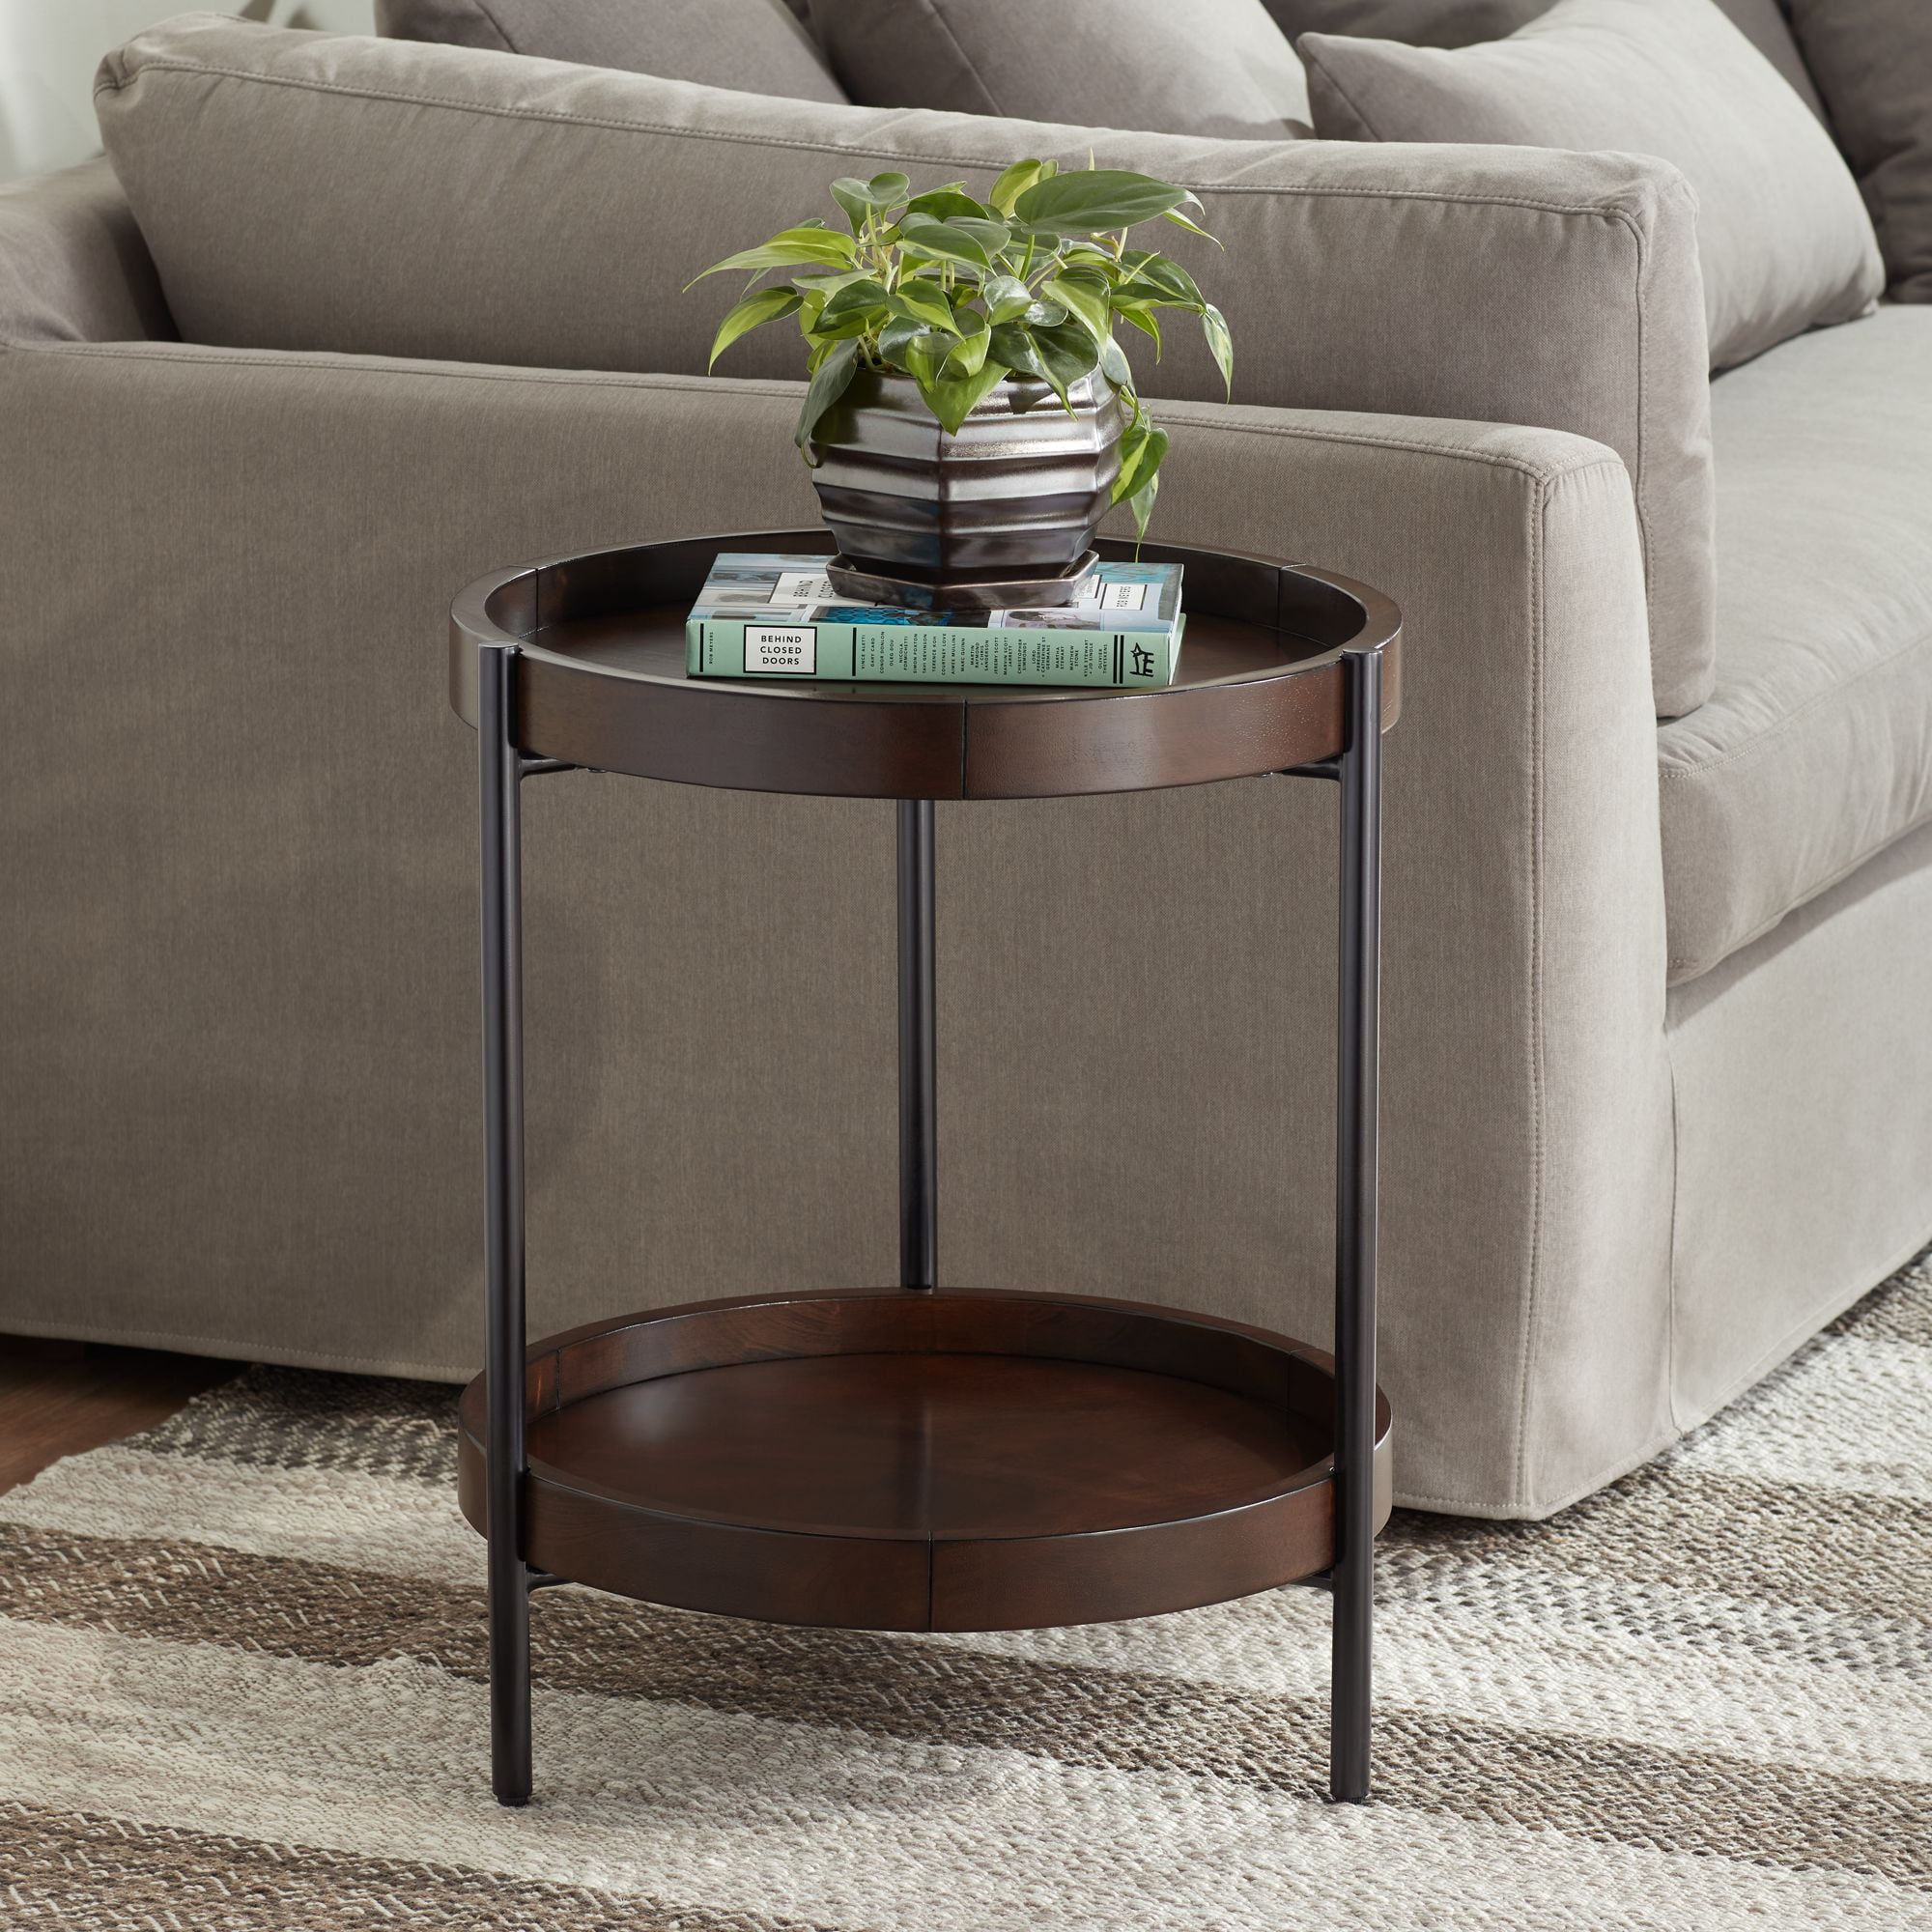 Wide Round Walnut Accent Table, 20 Round Decorative Table With Glass Top